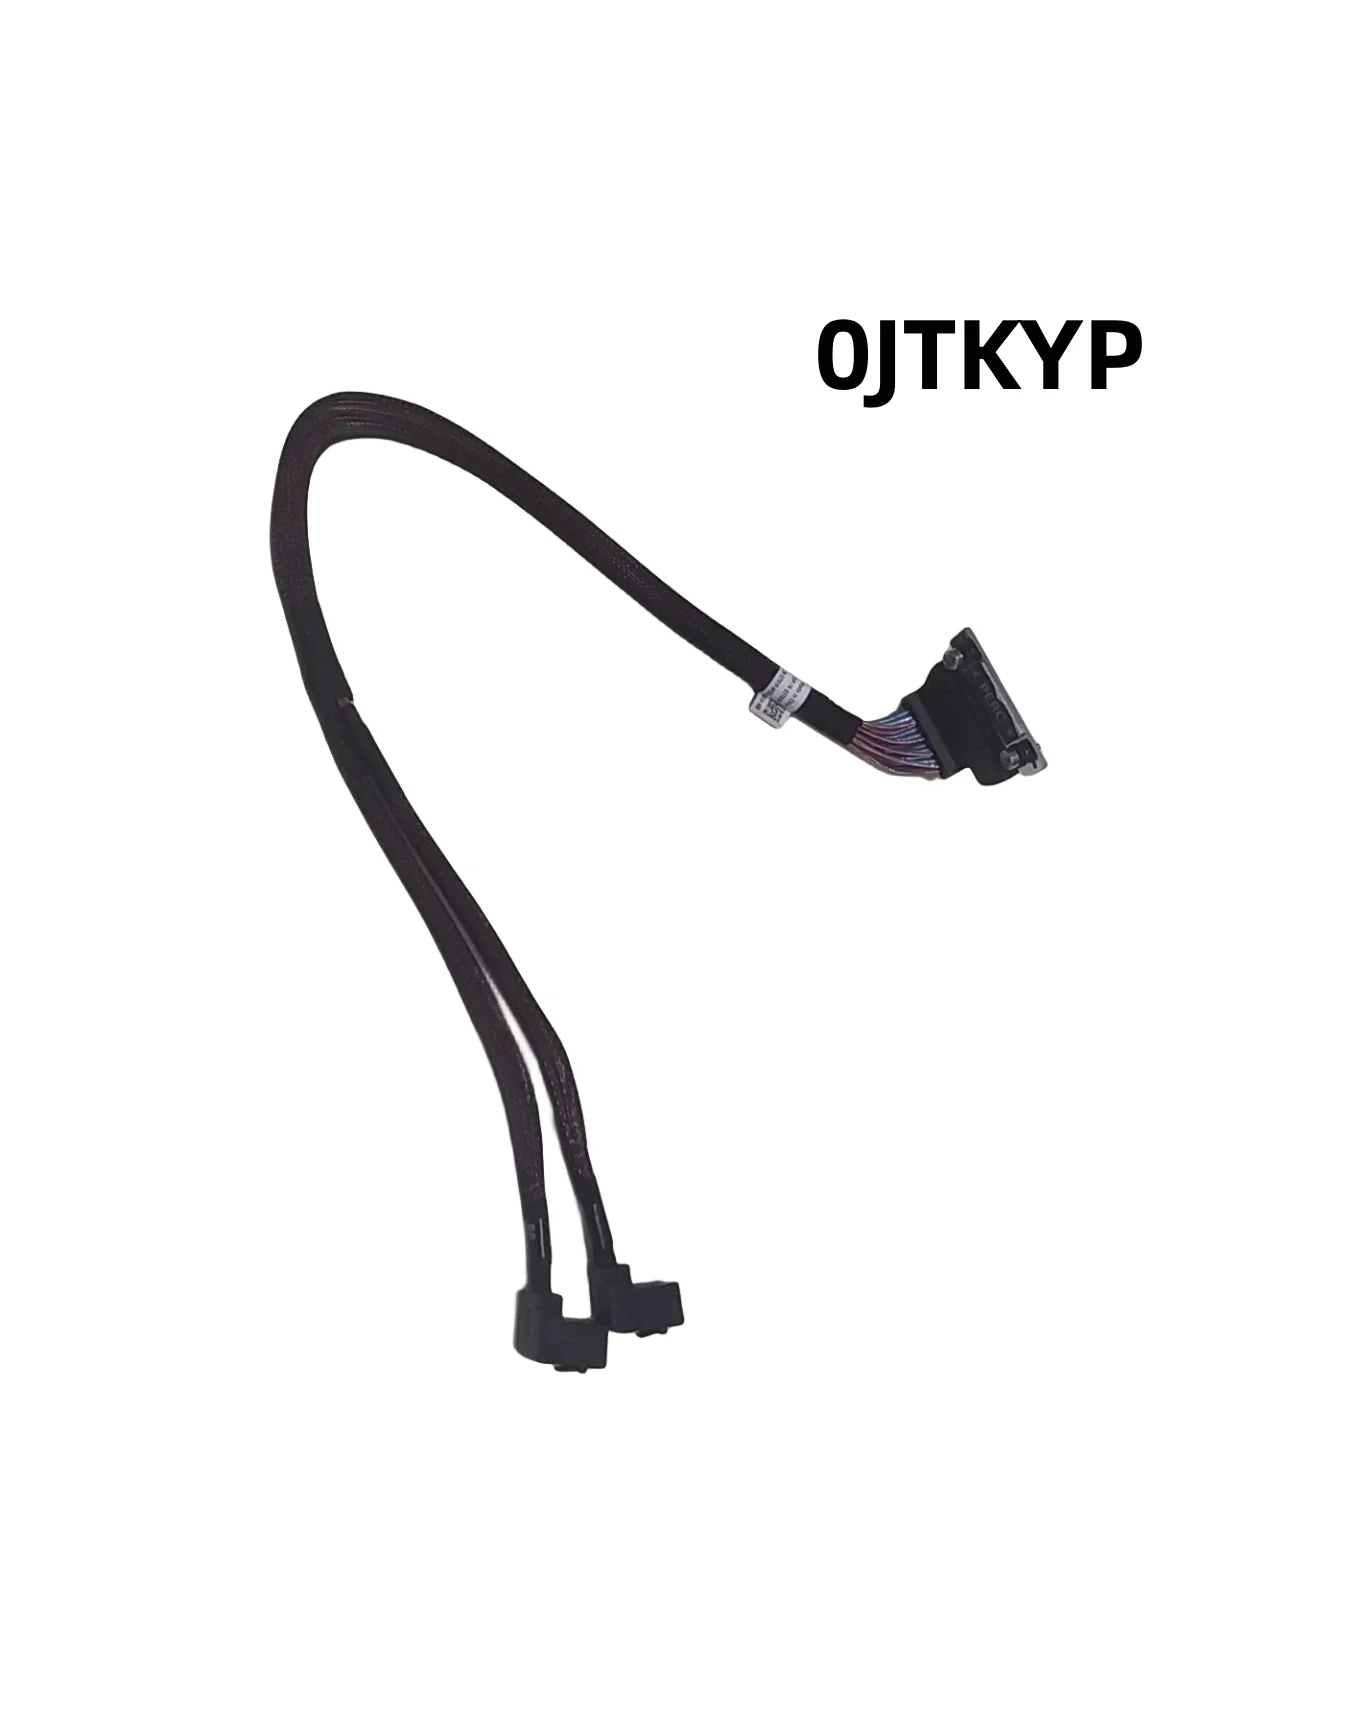 

0JTKYP JTKYP FOR Dell R740 Server Array Card/24 Bay Hard Disk Backplane Card Connection Cable PERC MB BP 100% Test OK